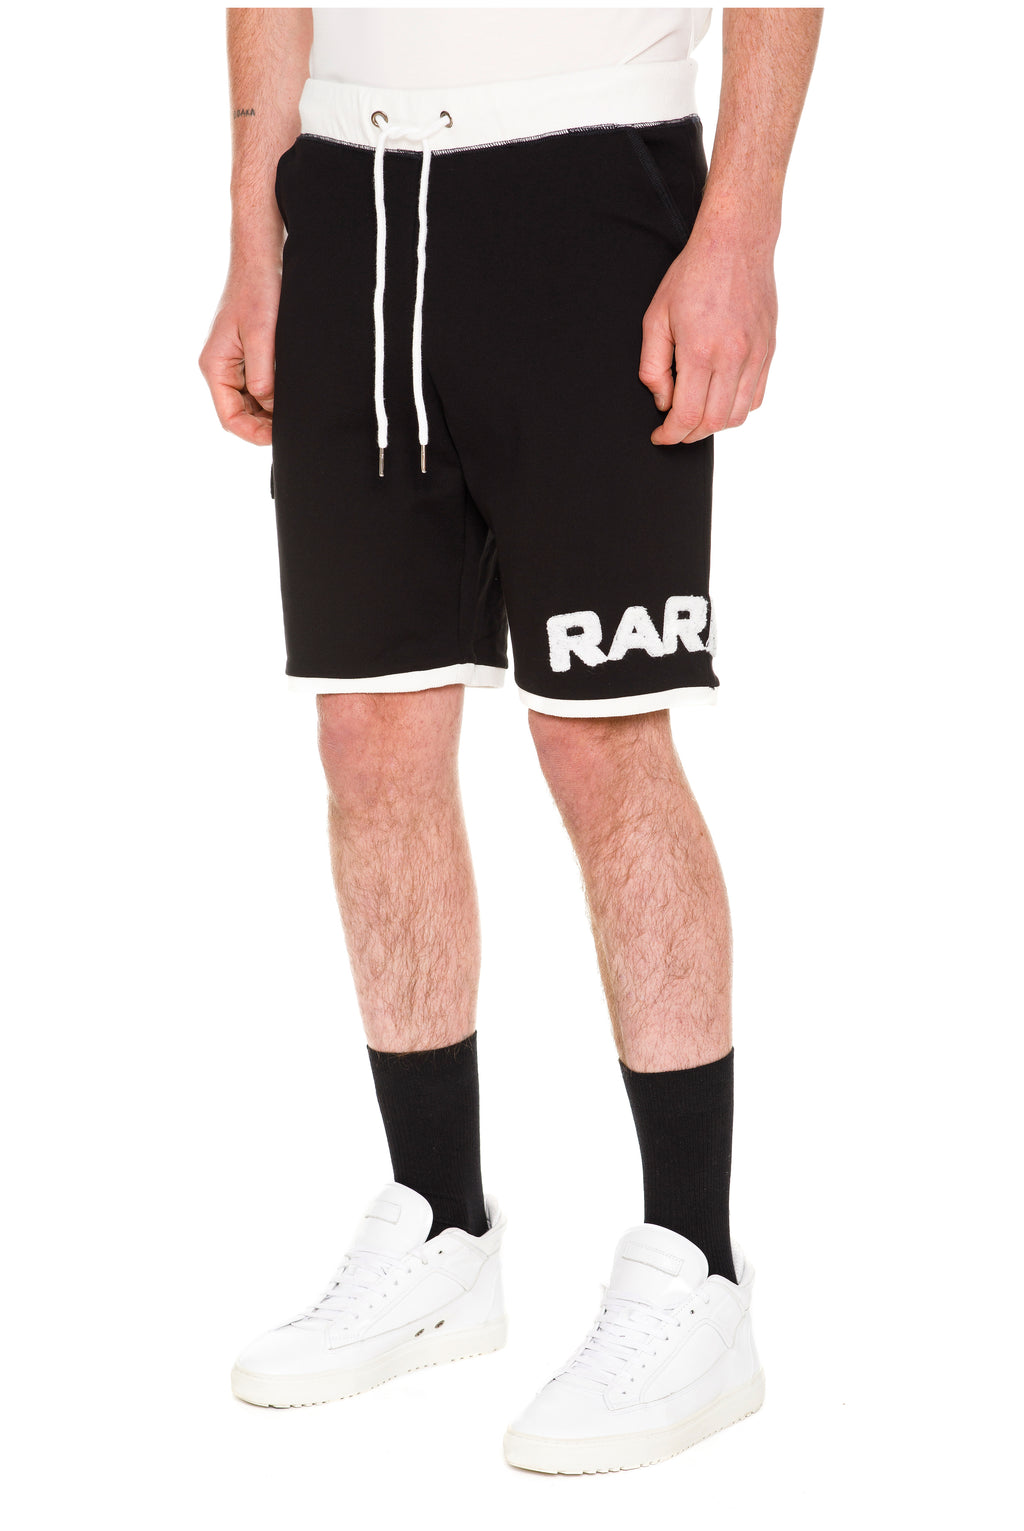 Black Rare Shorts Featuring Two Tone Detailing